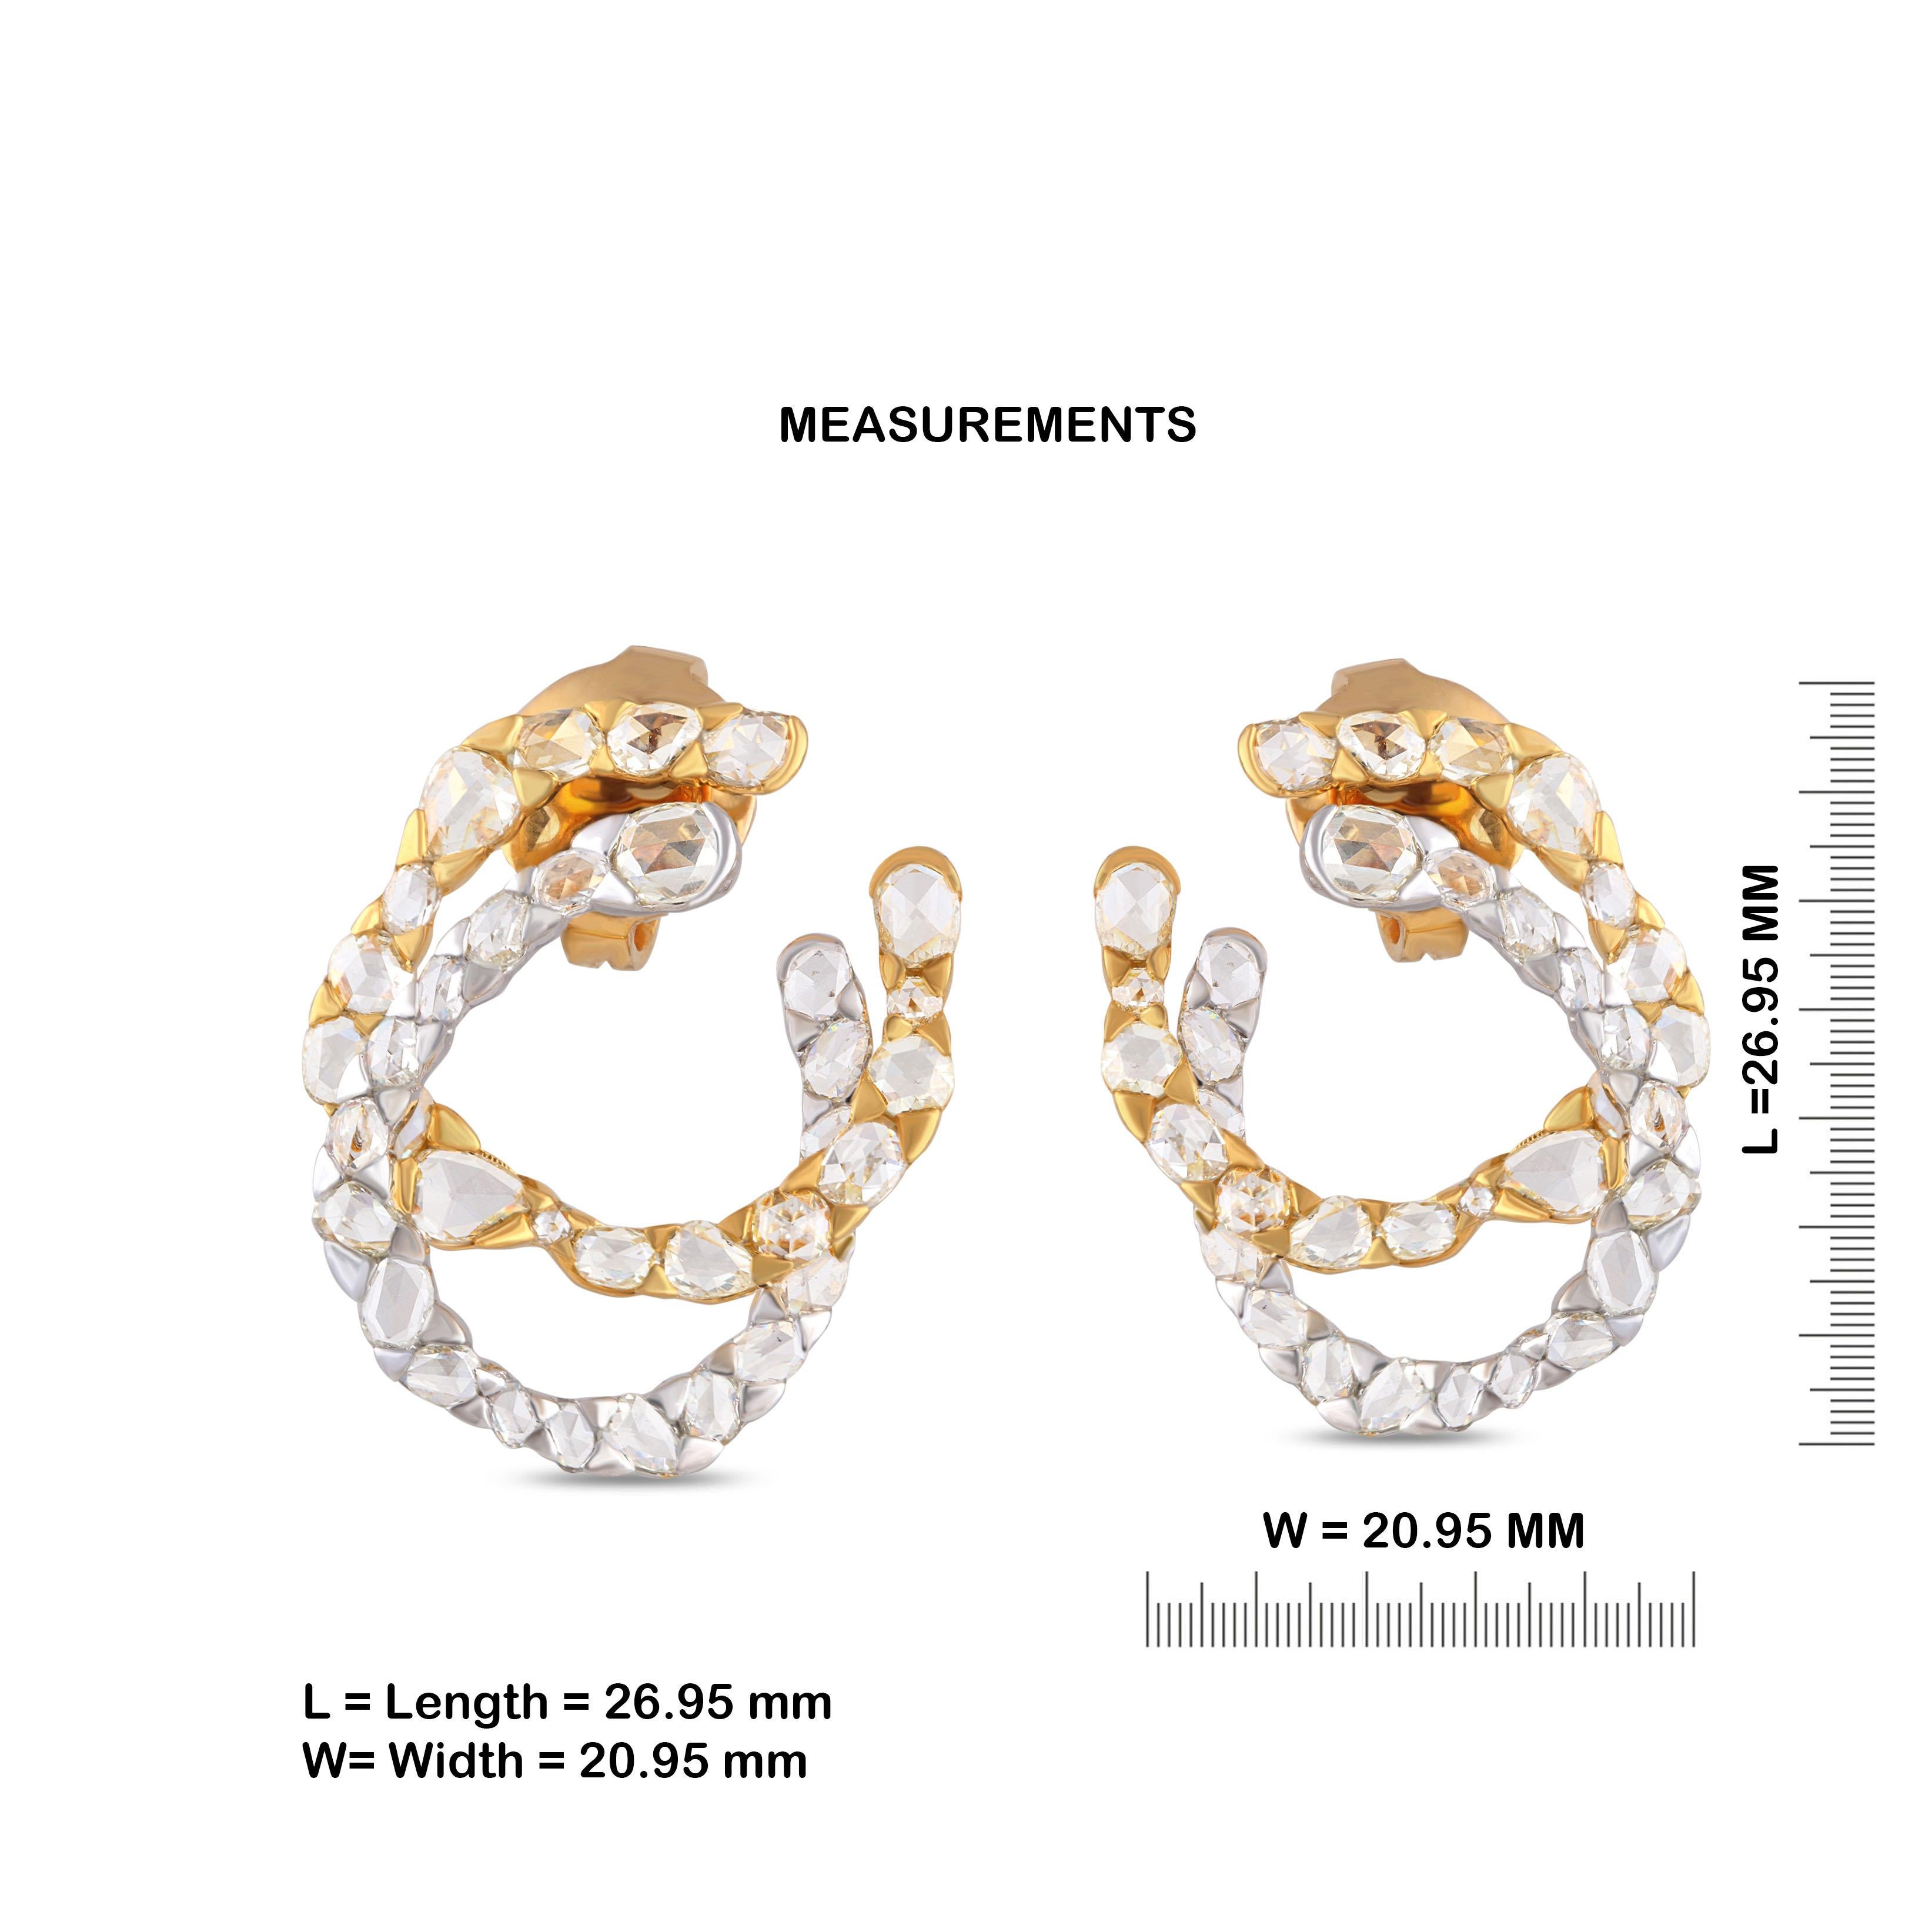 Gross Weight: 8.32 Grams
Diamond Weight: 4.25 cts
IGI Certification can be done on request.

Video of the product can be shared on request

These earrings are in asymmetrical circular form, fabricated in two gold karatage that is combination of 18